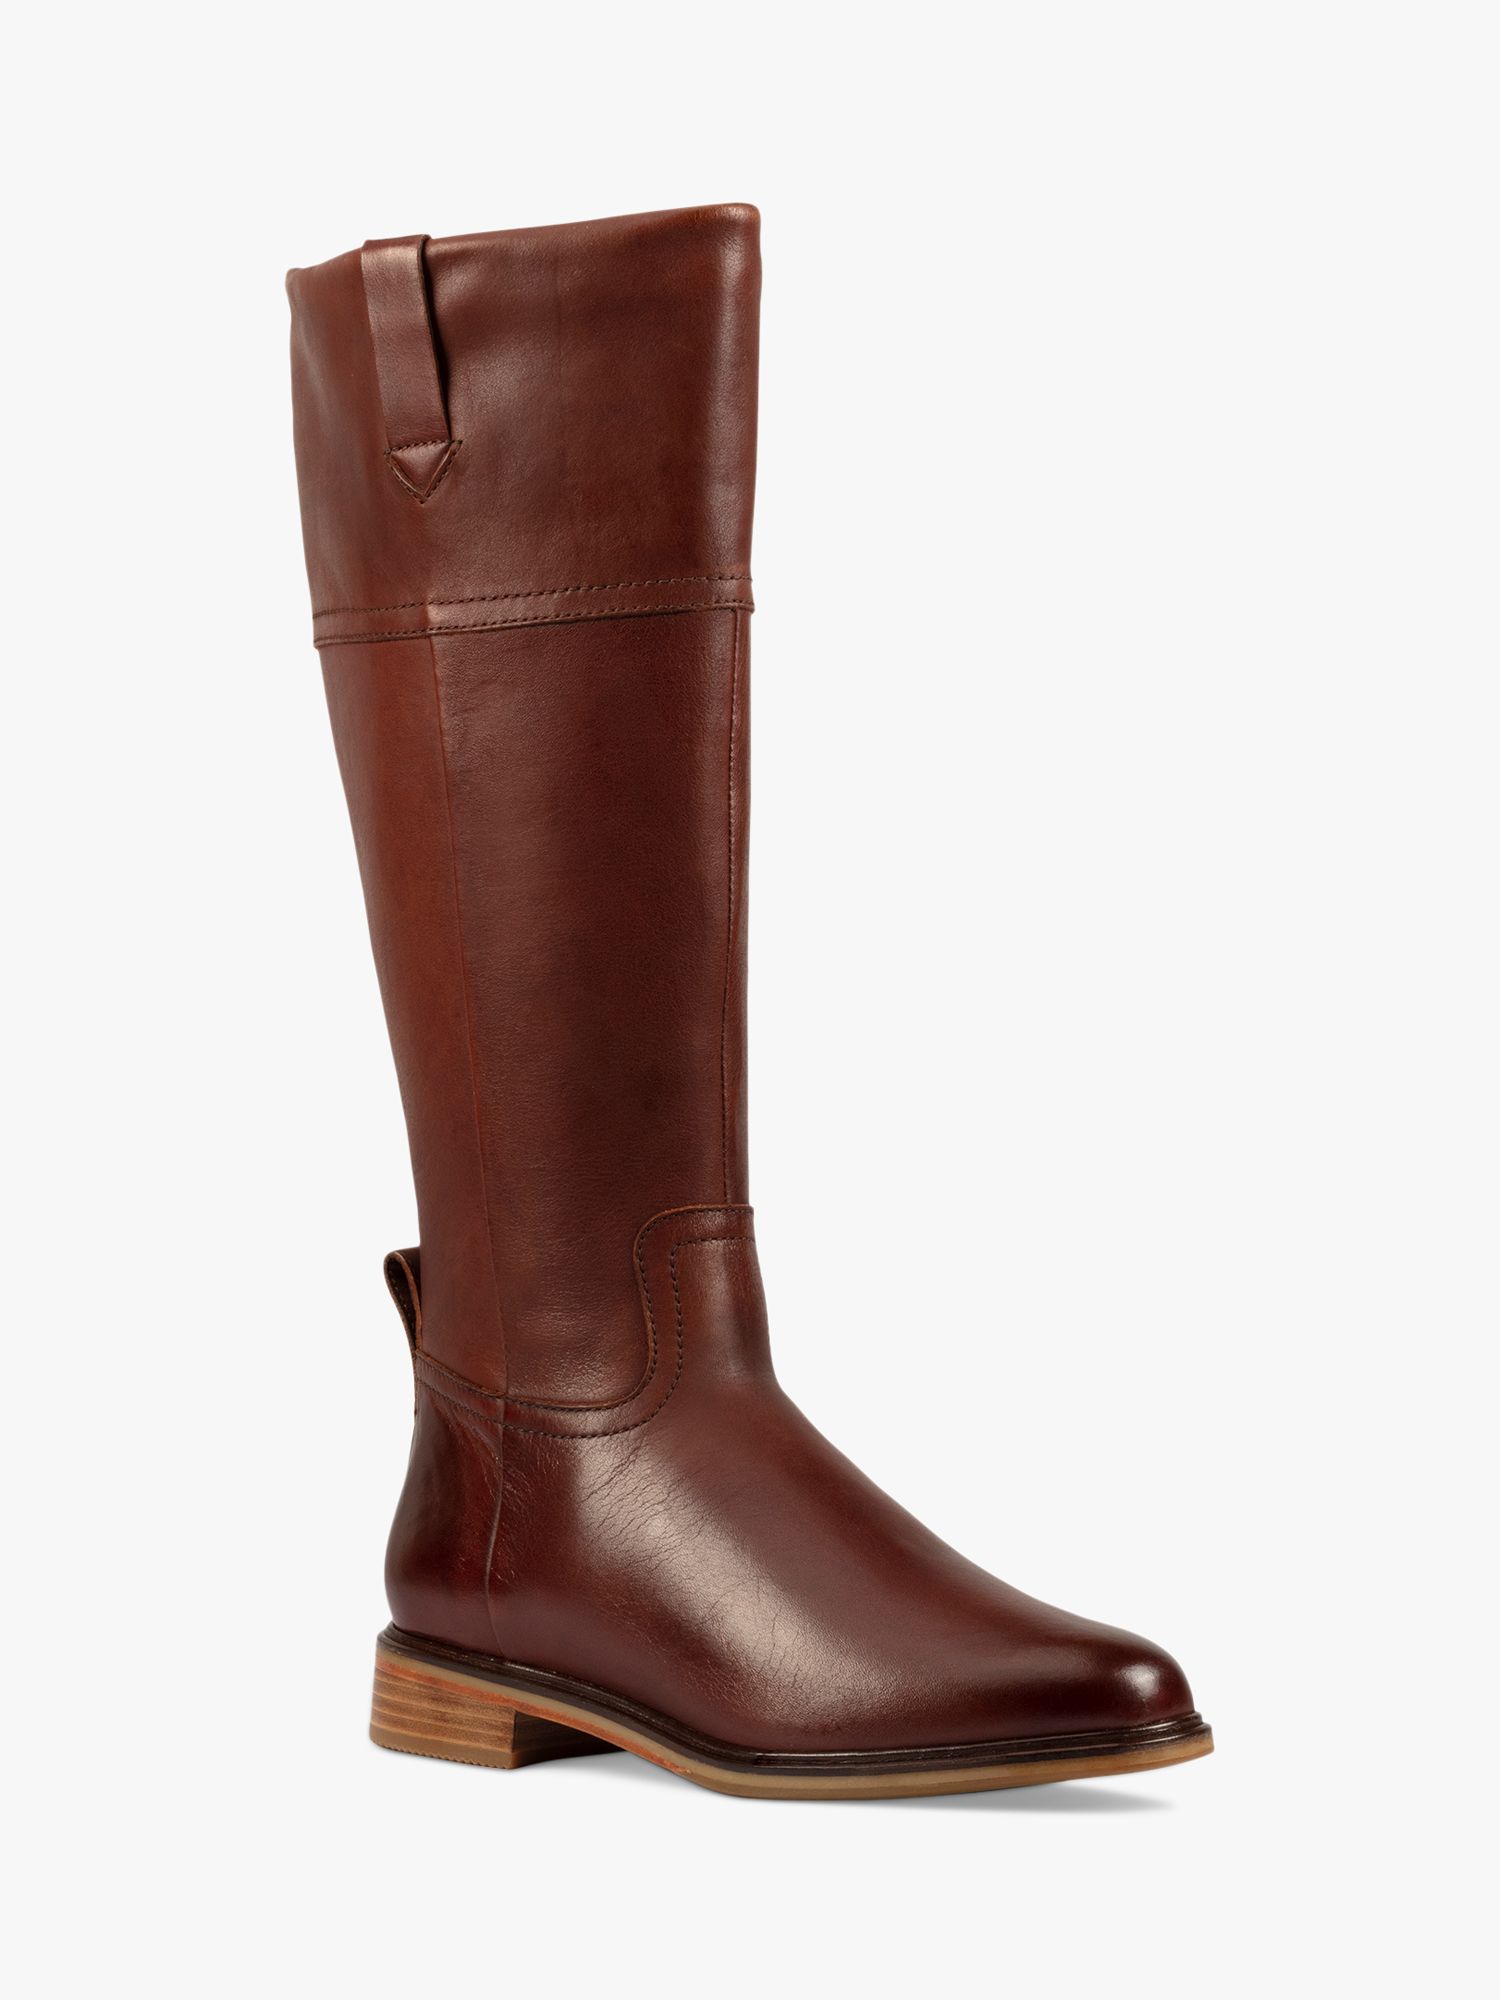 Clarkdale Hi Leather Knee High Boots, Tan at John Lewis Partners